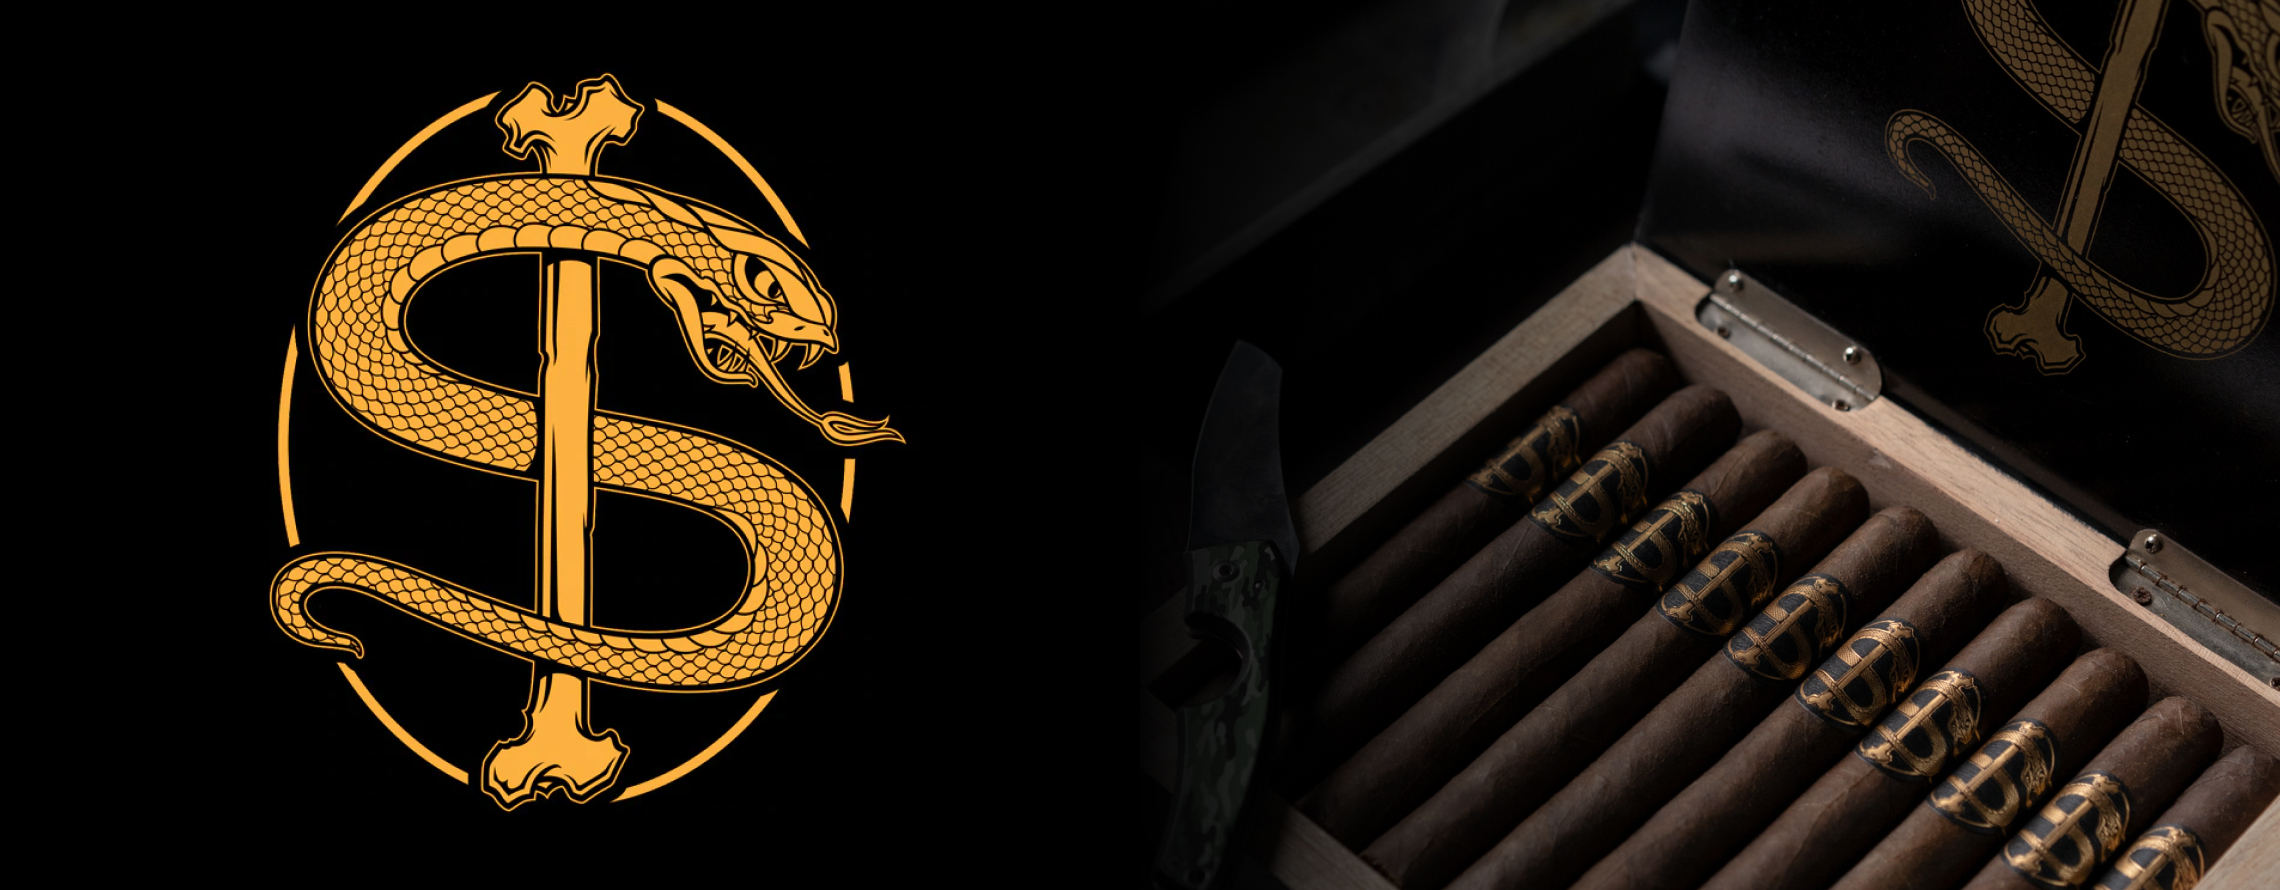 Room 101 Snake Shake Limited Edition Luxury Cigar Club Exclusive